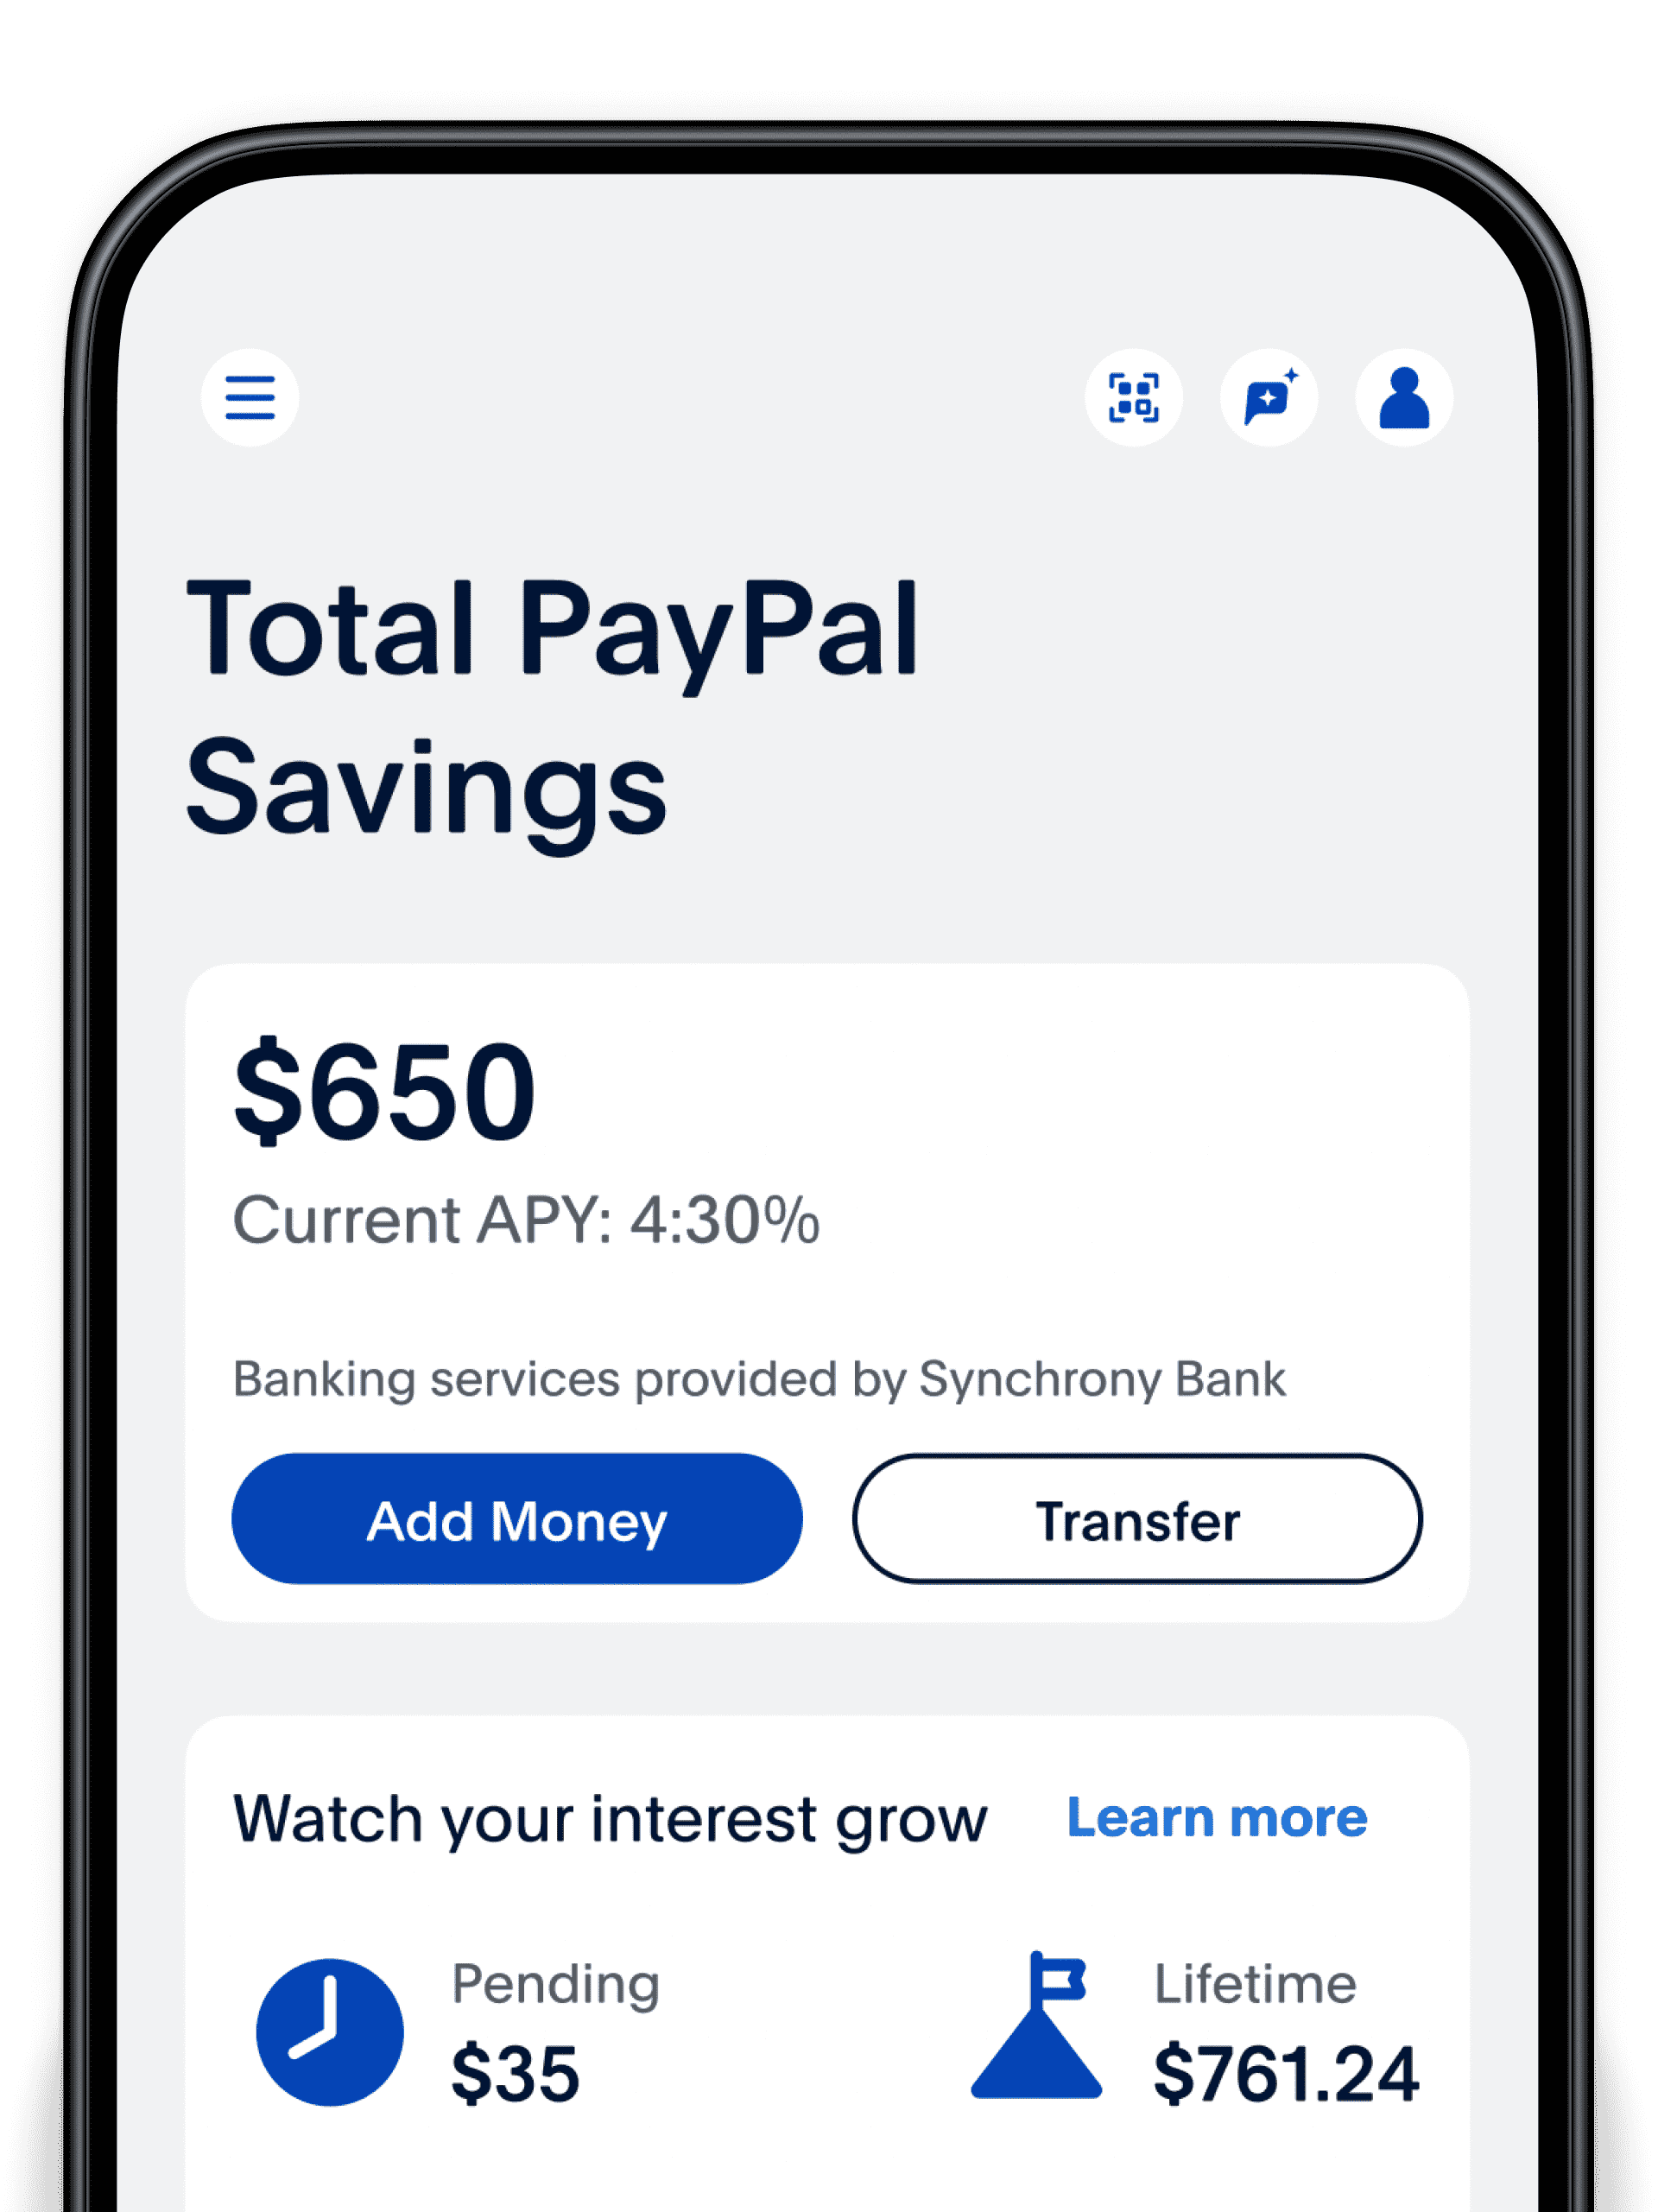 Get Free Paypal Money in | PrizeRebel